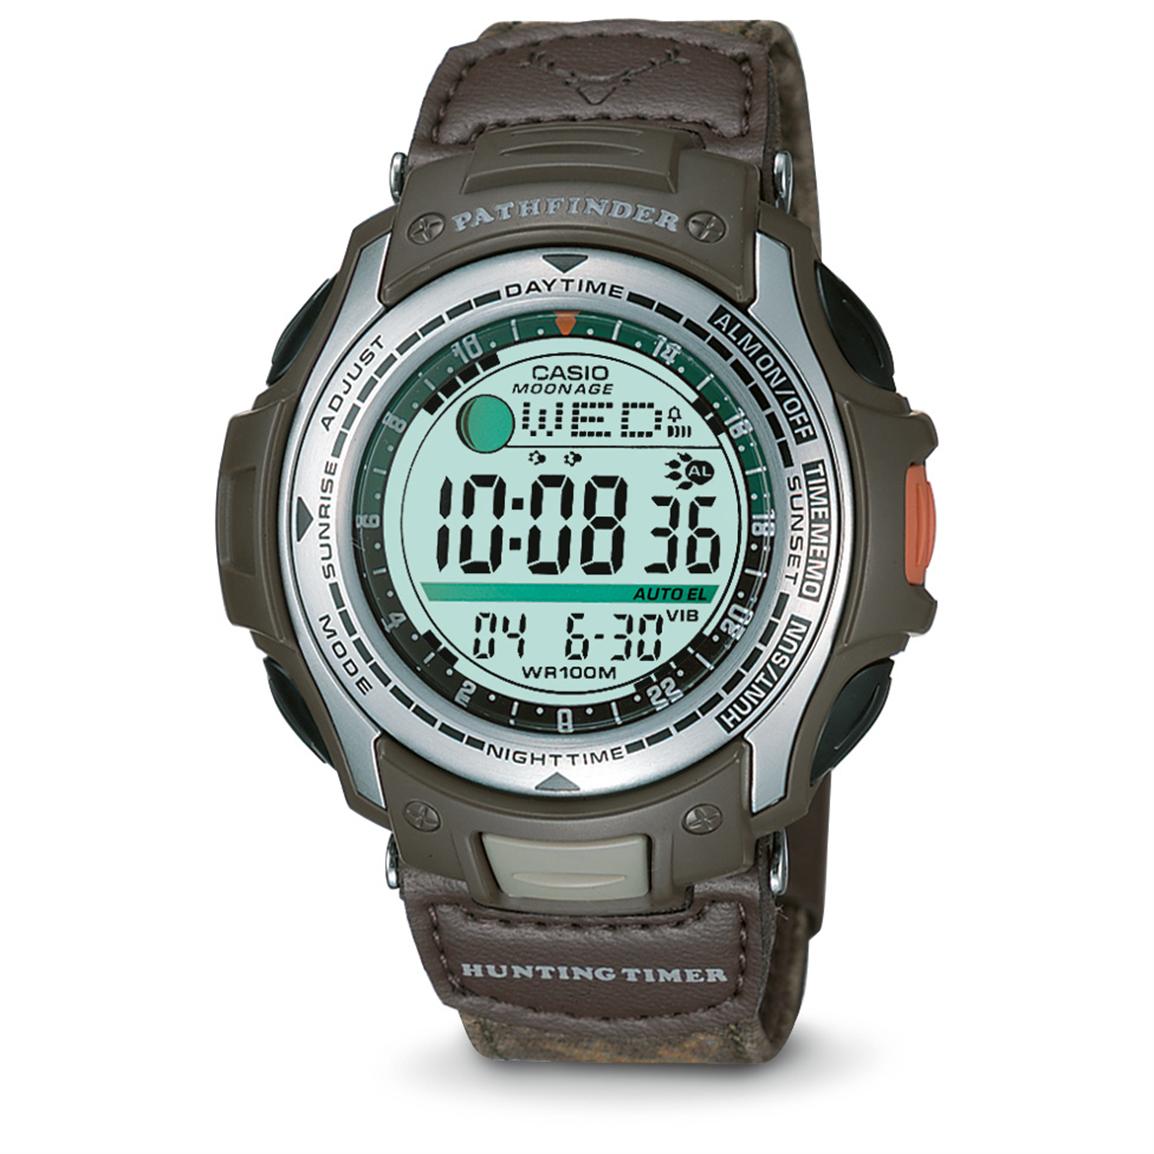 Casio® Pathfinder Hunting Watch - 218538, Watches at Sportsman's Guide